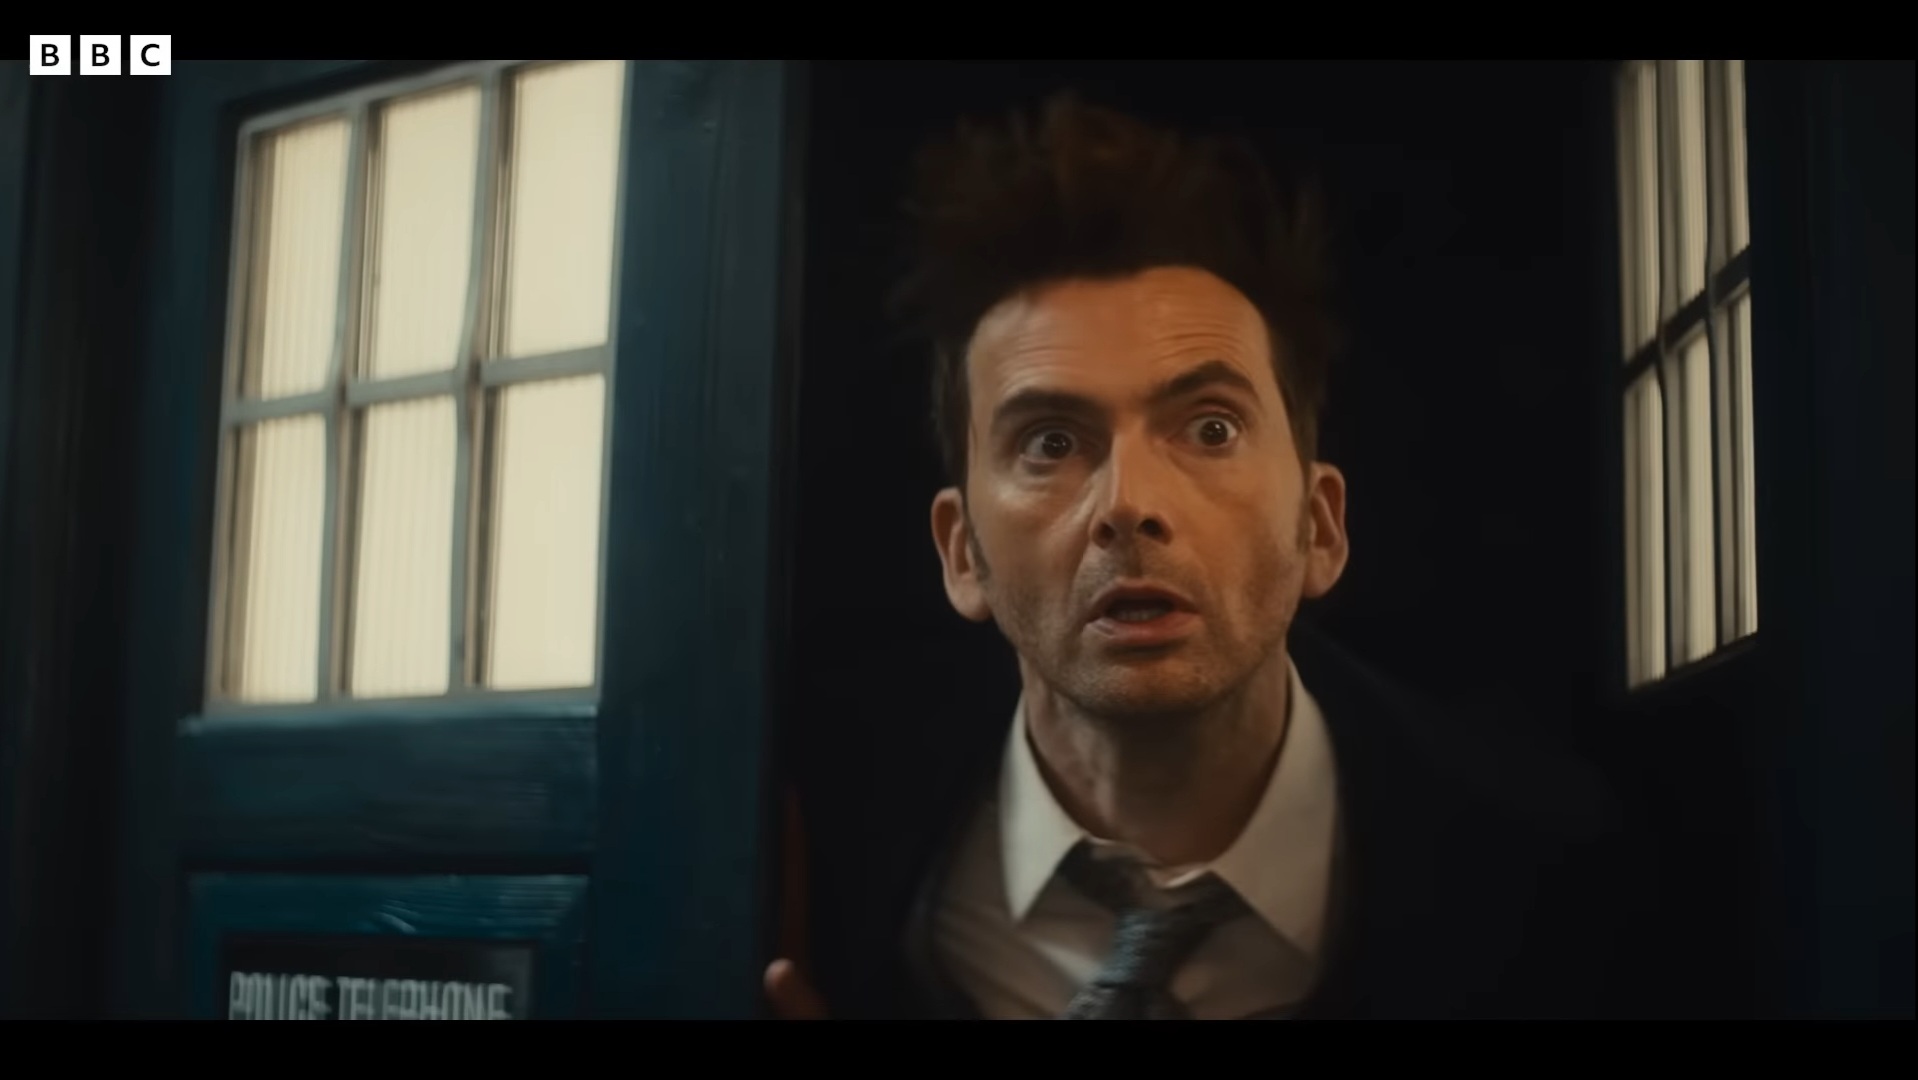 The Fourteenth Doctor bursts out of the TARDIS.